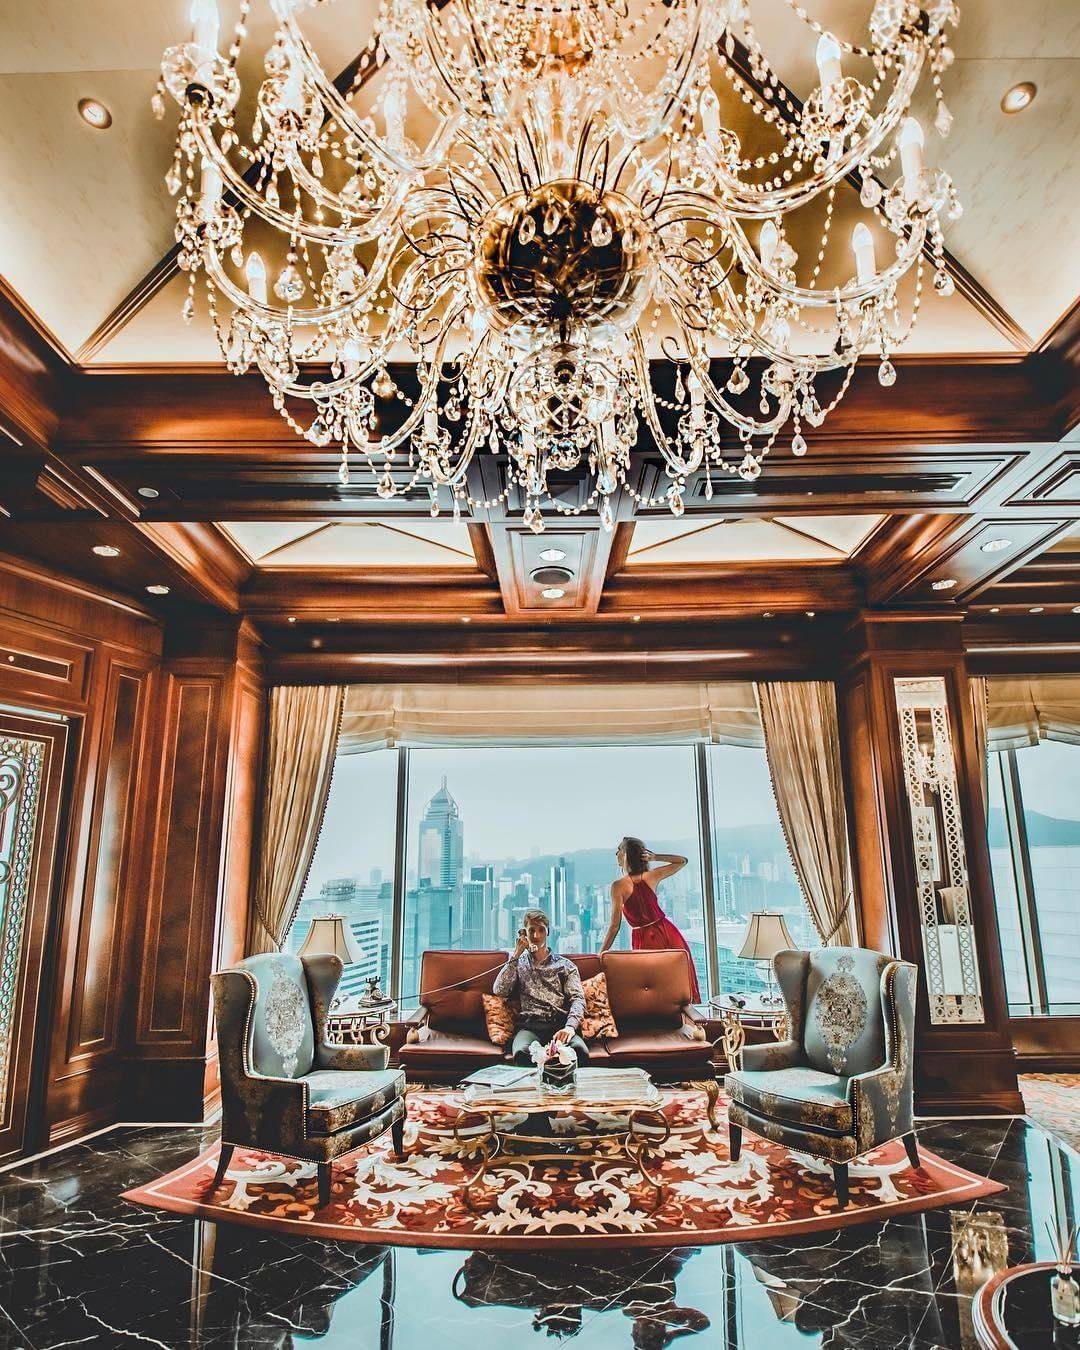 What makes this luxury experience stand out from any other? The Island Shangri-La, Hong Kong. Photo: @shangrilahotels/ Instagram